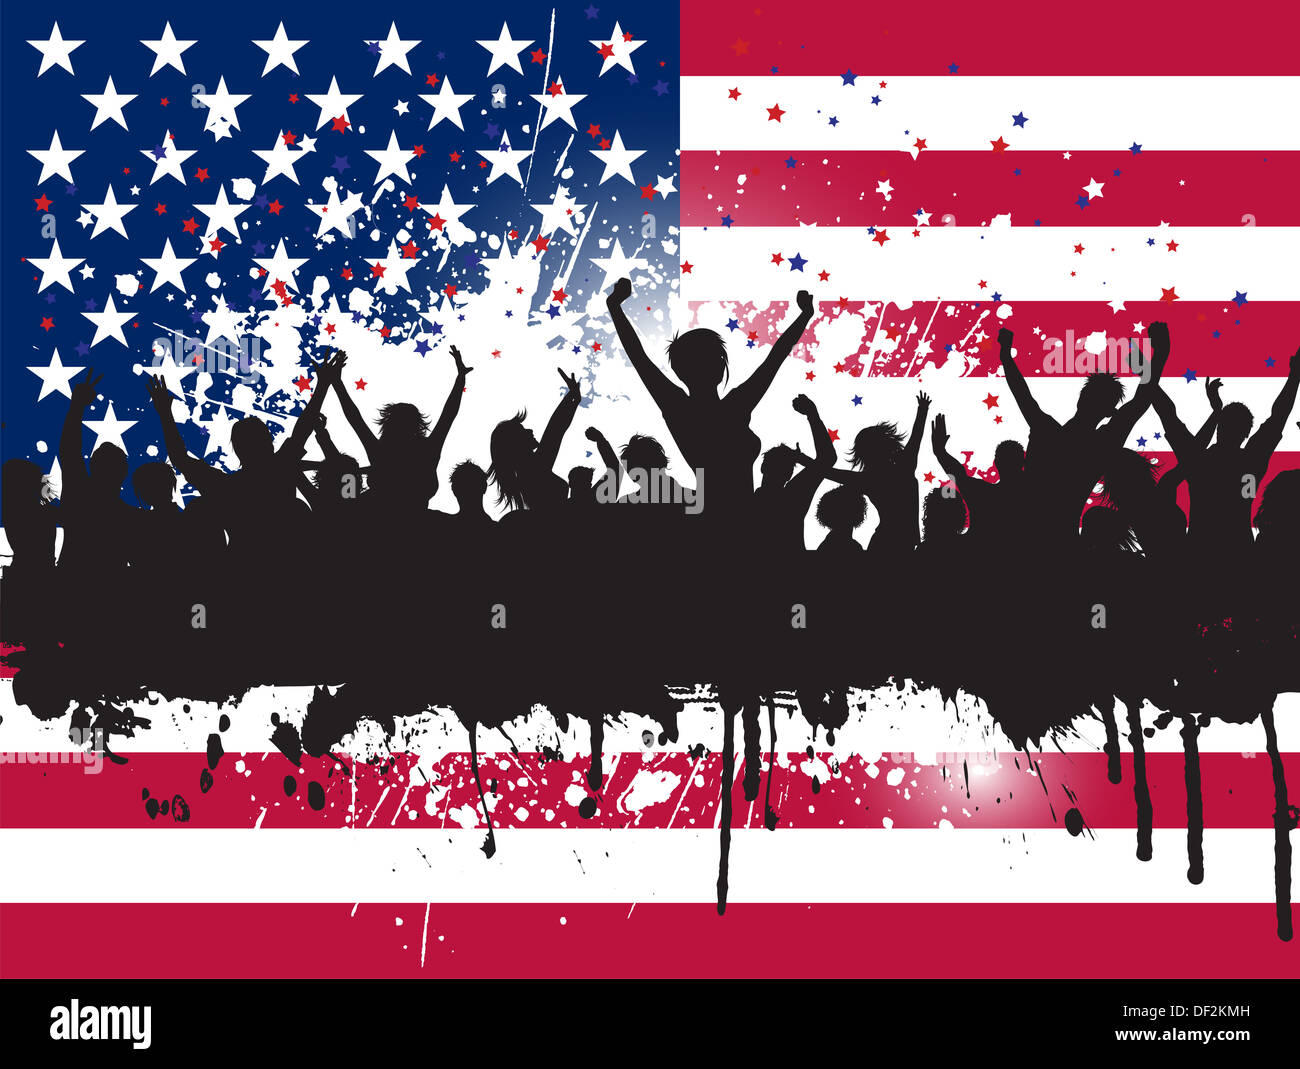 Silhouette of a grunge excited party crowd on an American flag background Stock Photo